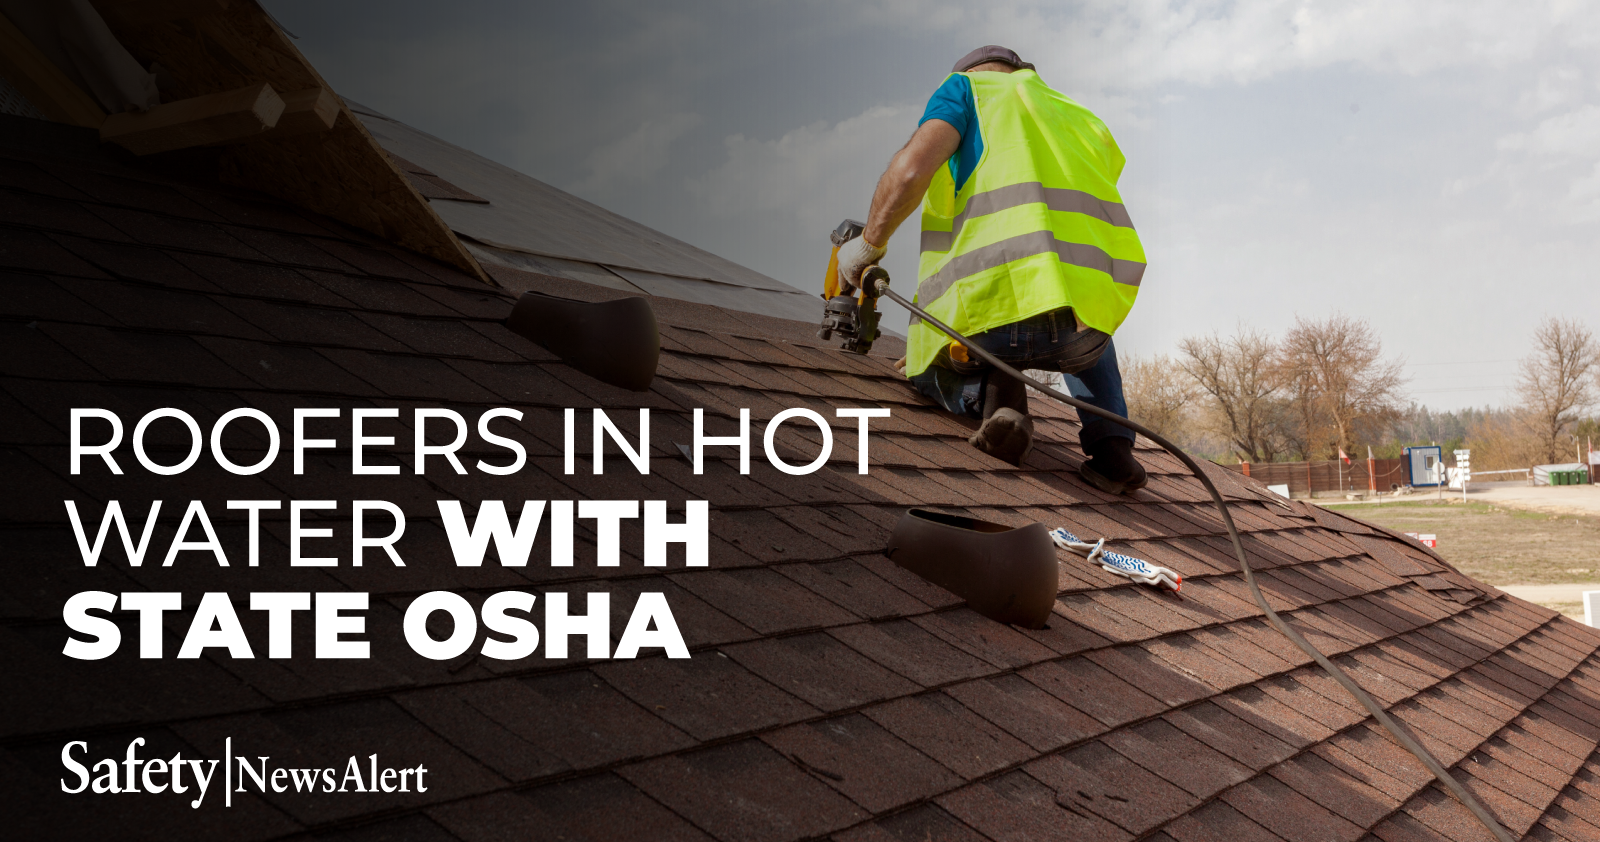 Roofers In Hot Water With State OSHA